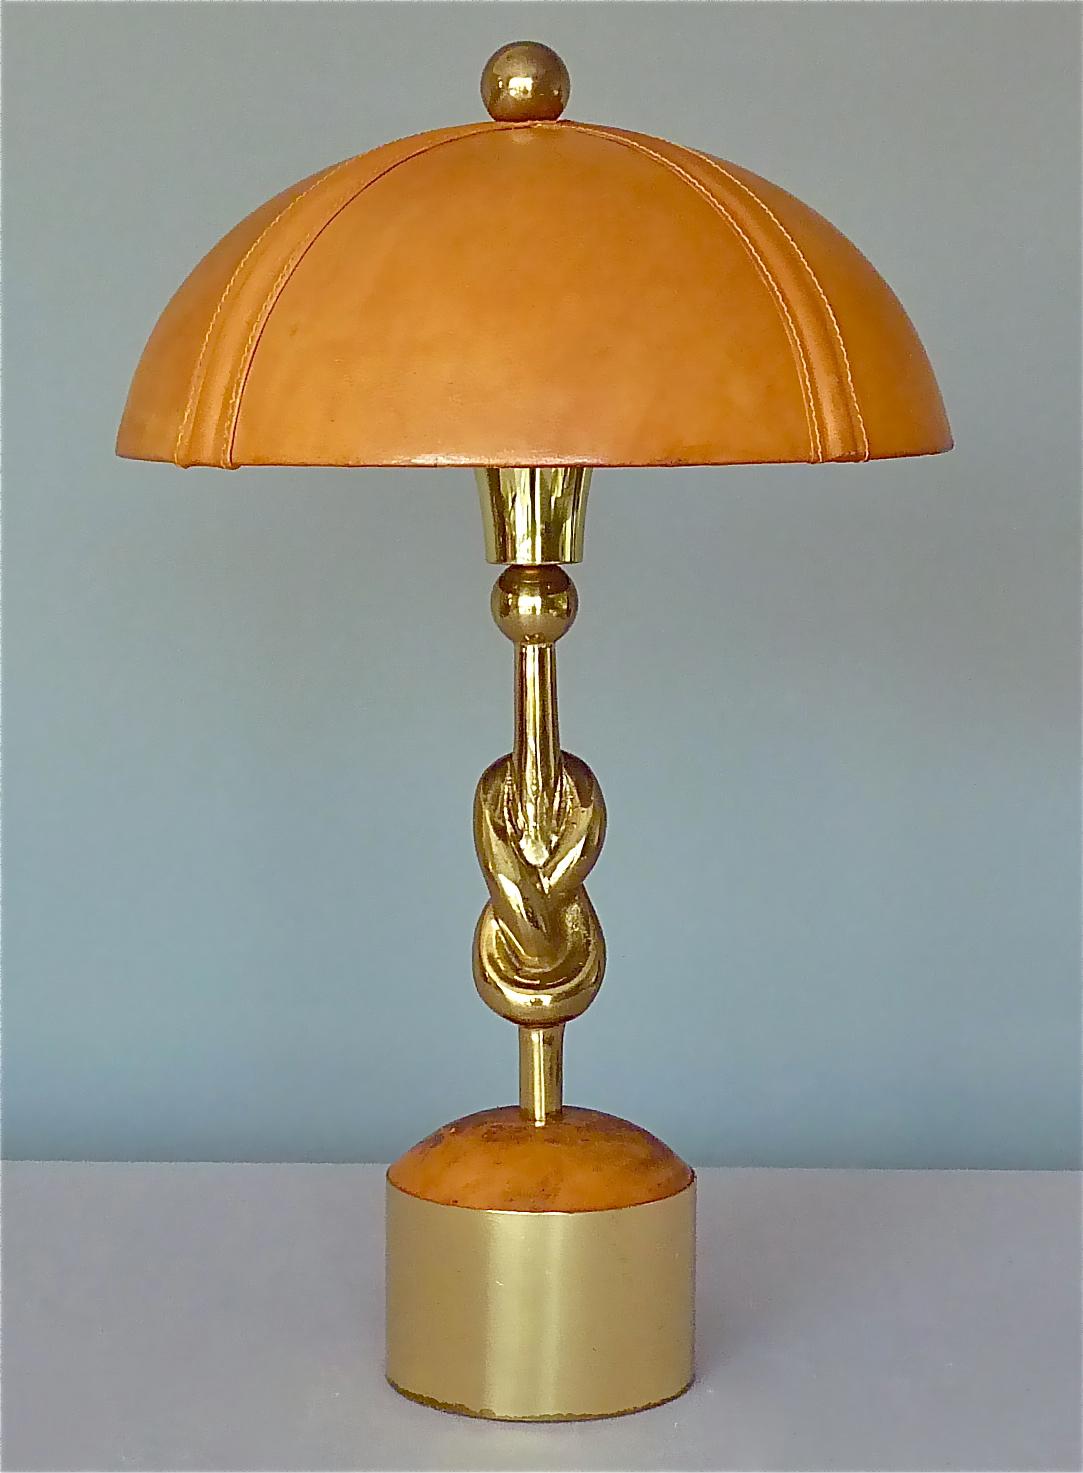 Late 20th Century Sculptural Gilt Bronze Leather Knotted Table Lamp French 1970s Jansen Pergay Era For Sale